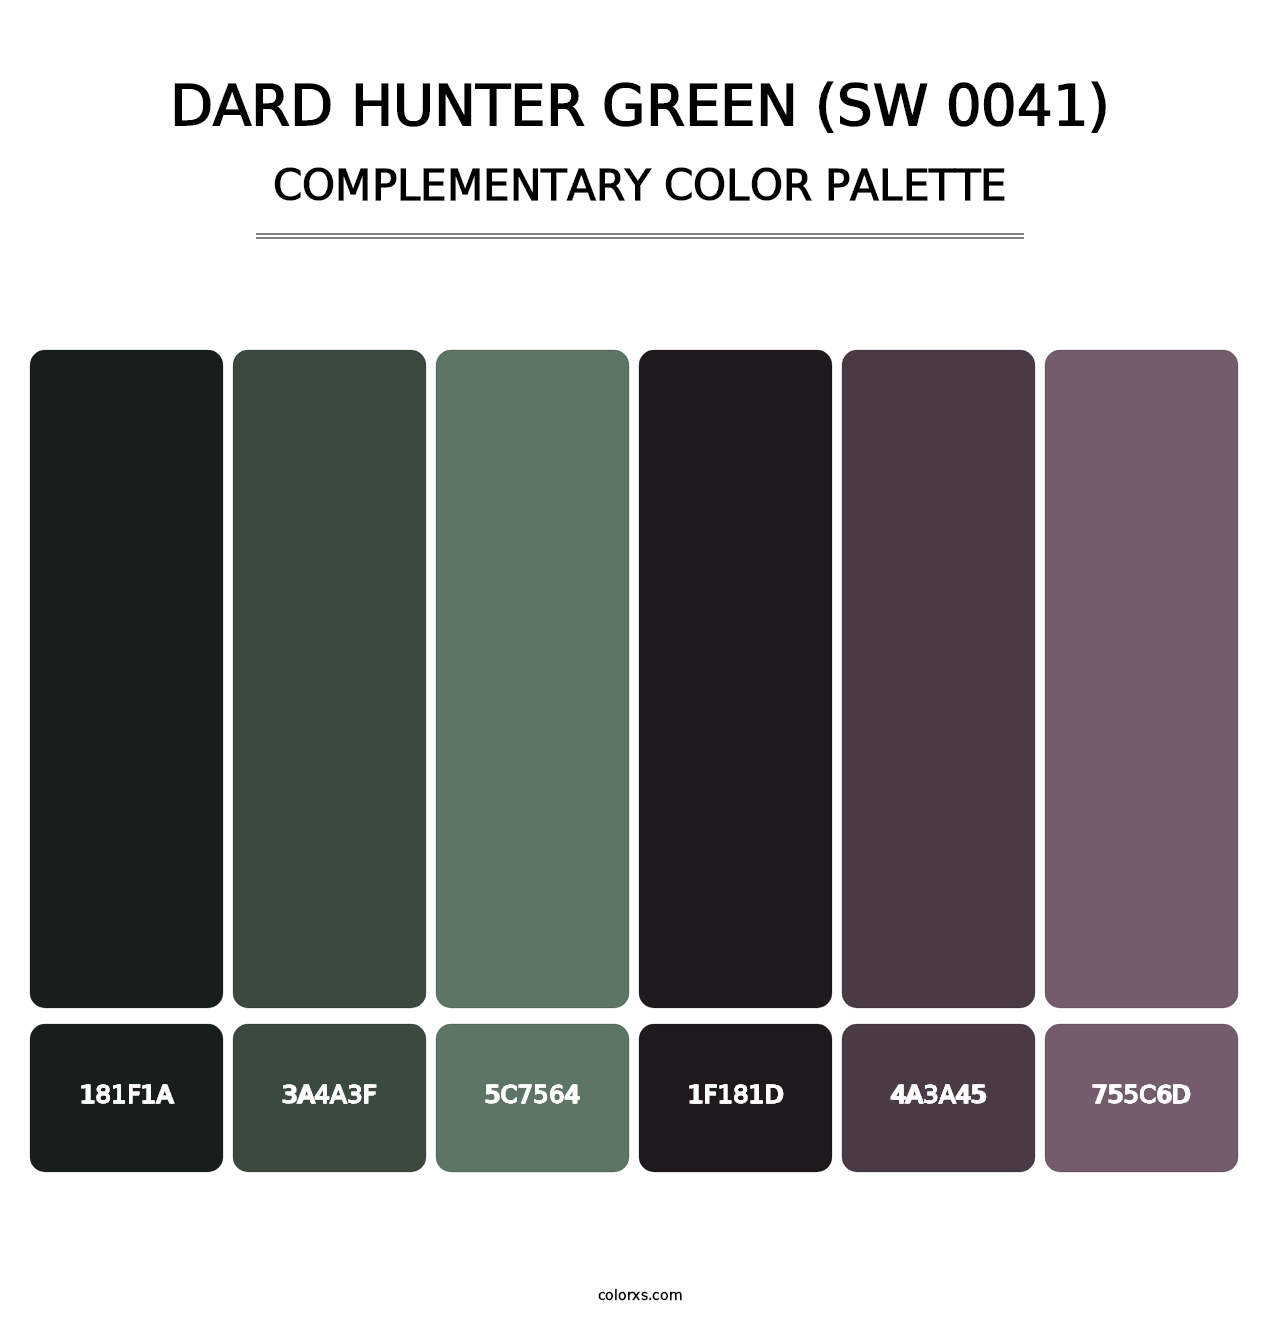 Dard Hunter Green (SW 0041) - Complementary Color Palette